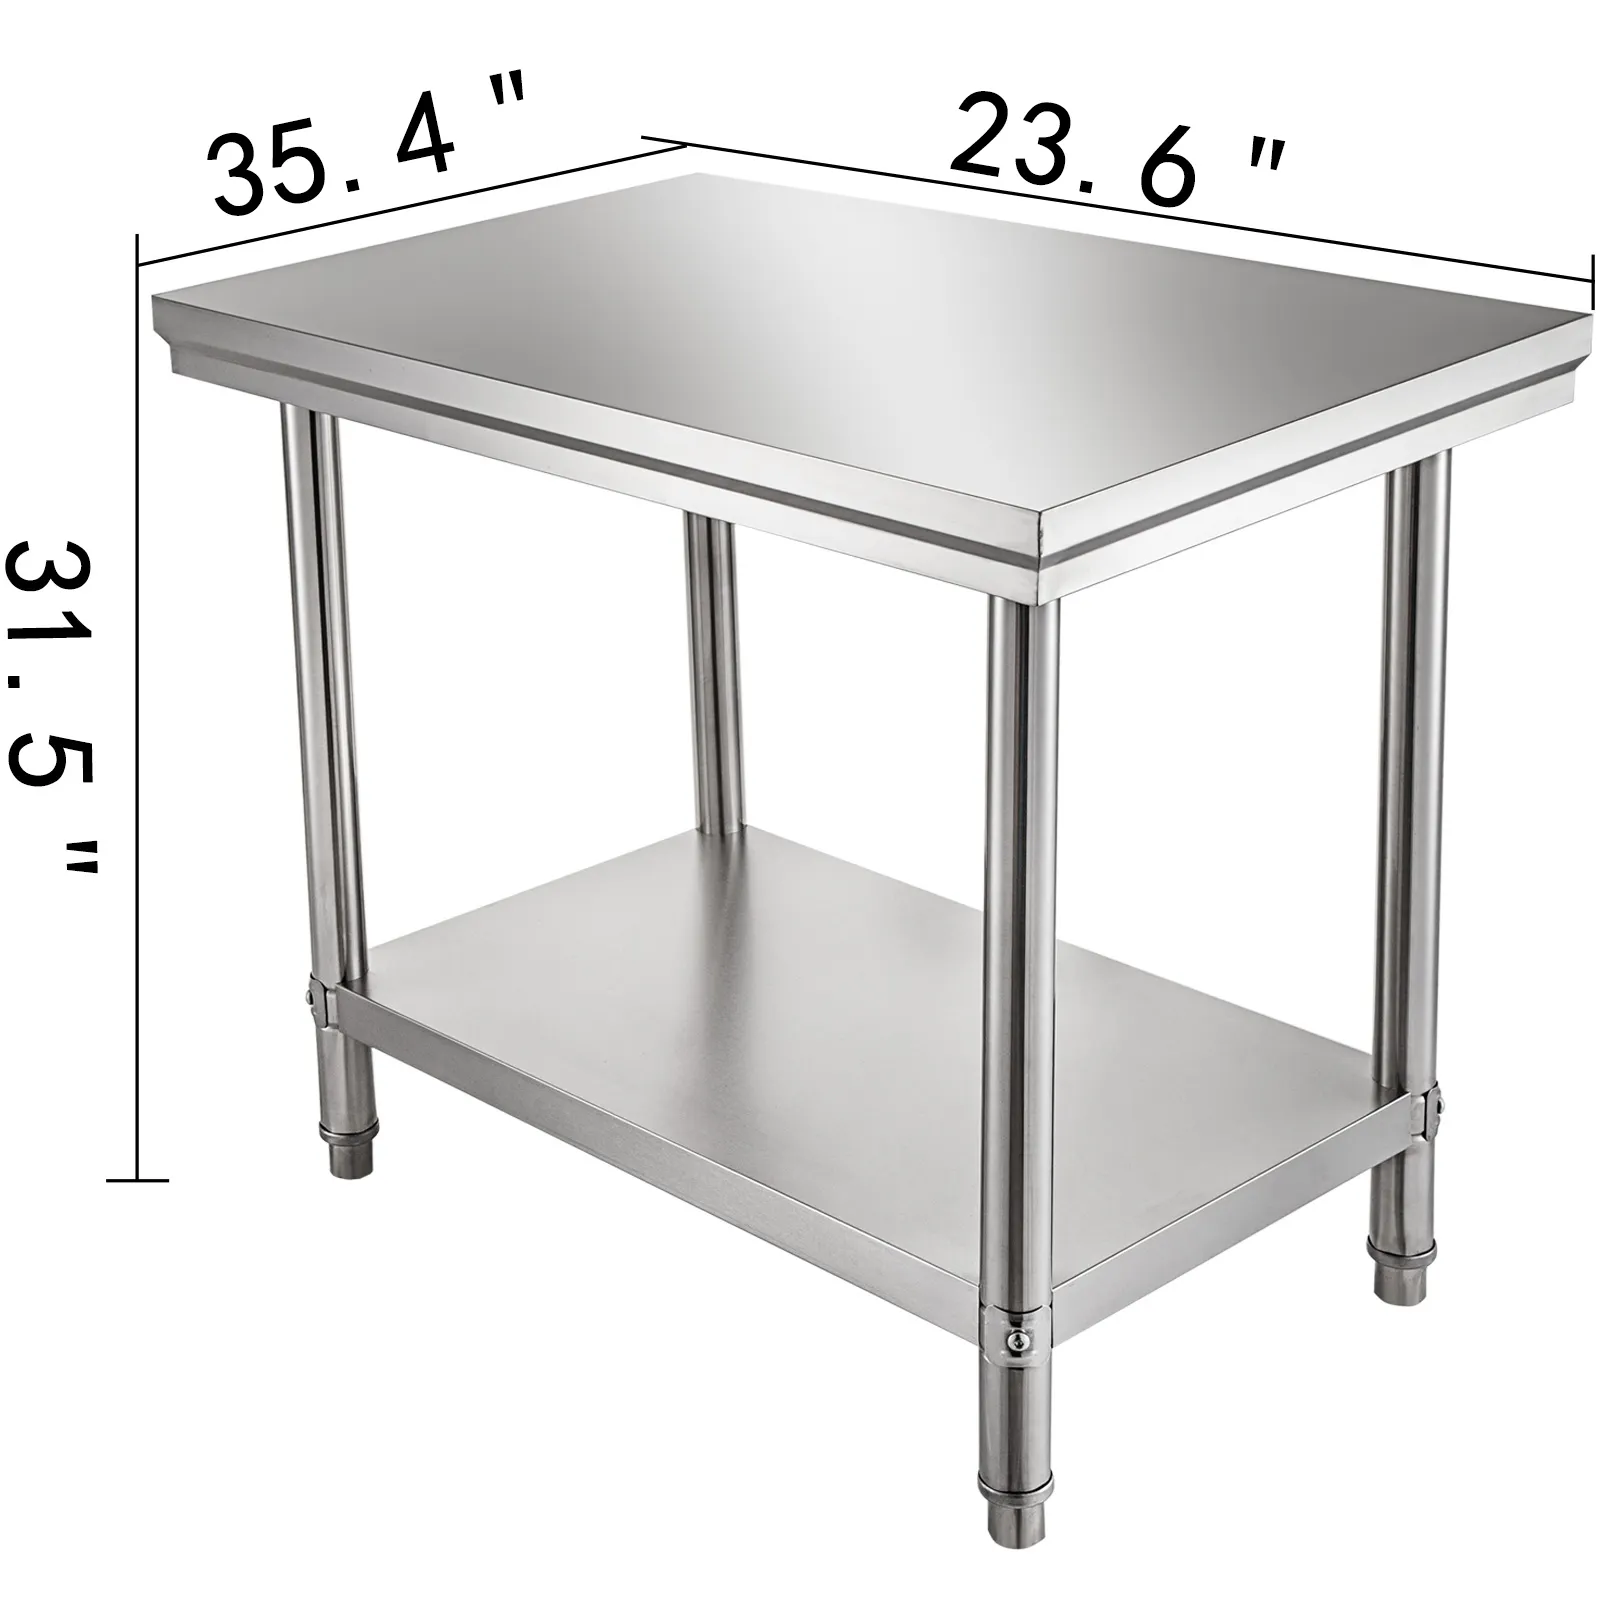 Custom Sizes Restaurant Kitchen Stainless Steel Work two three layers Table Commercial Kitchen Equipmentx Factory Direct